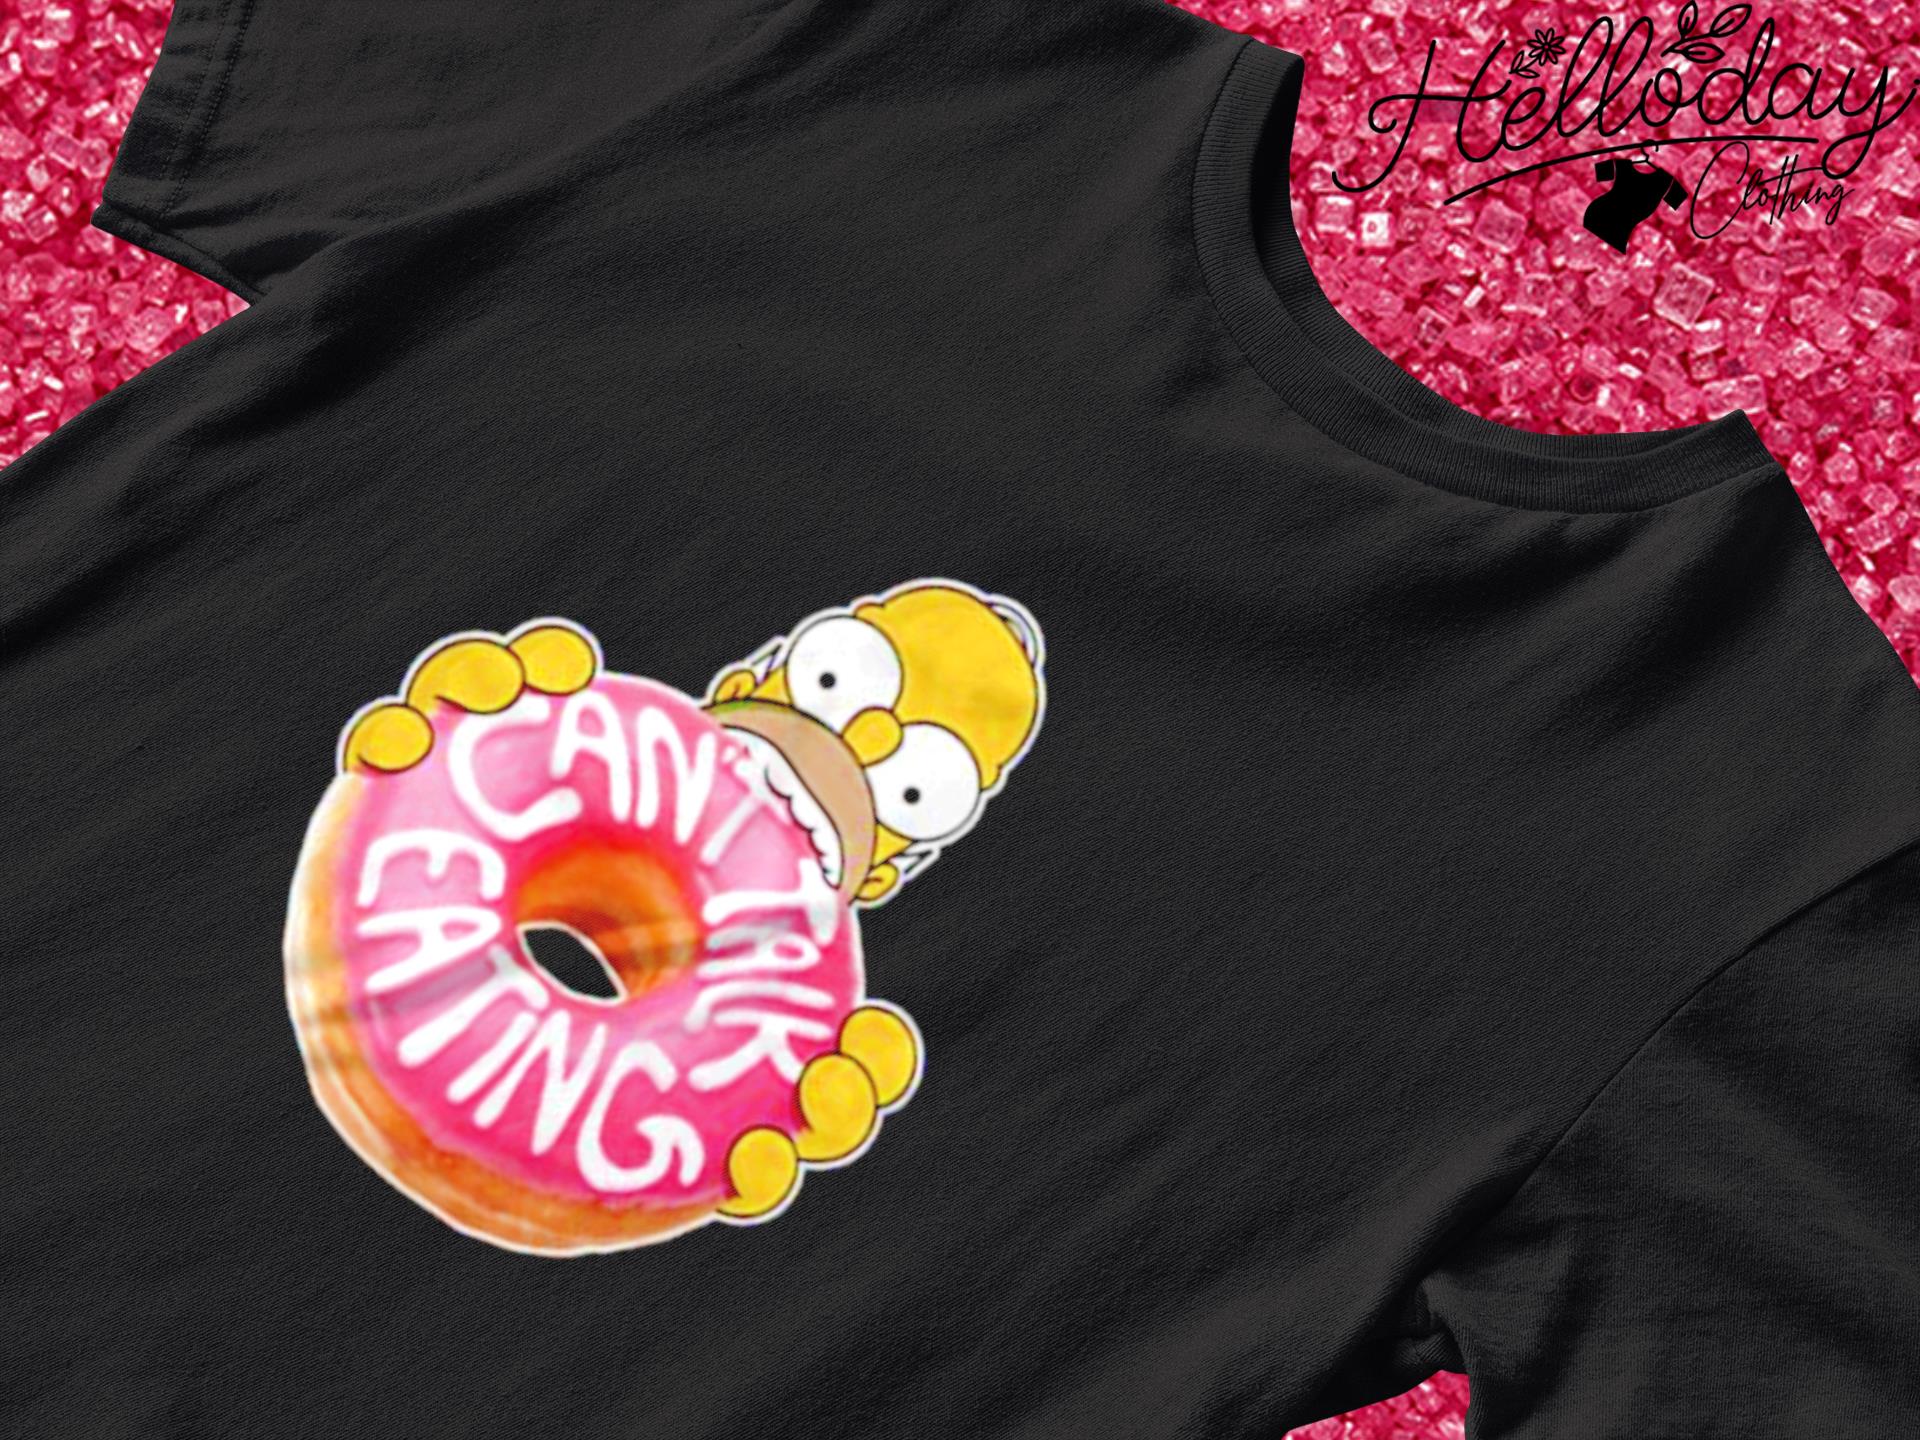 The simpsons homer can’t talk eating shirt